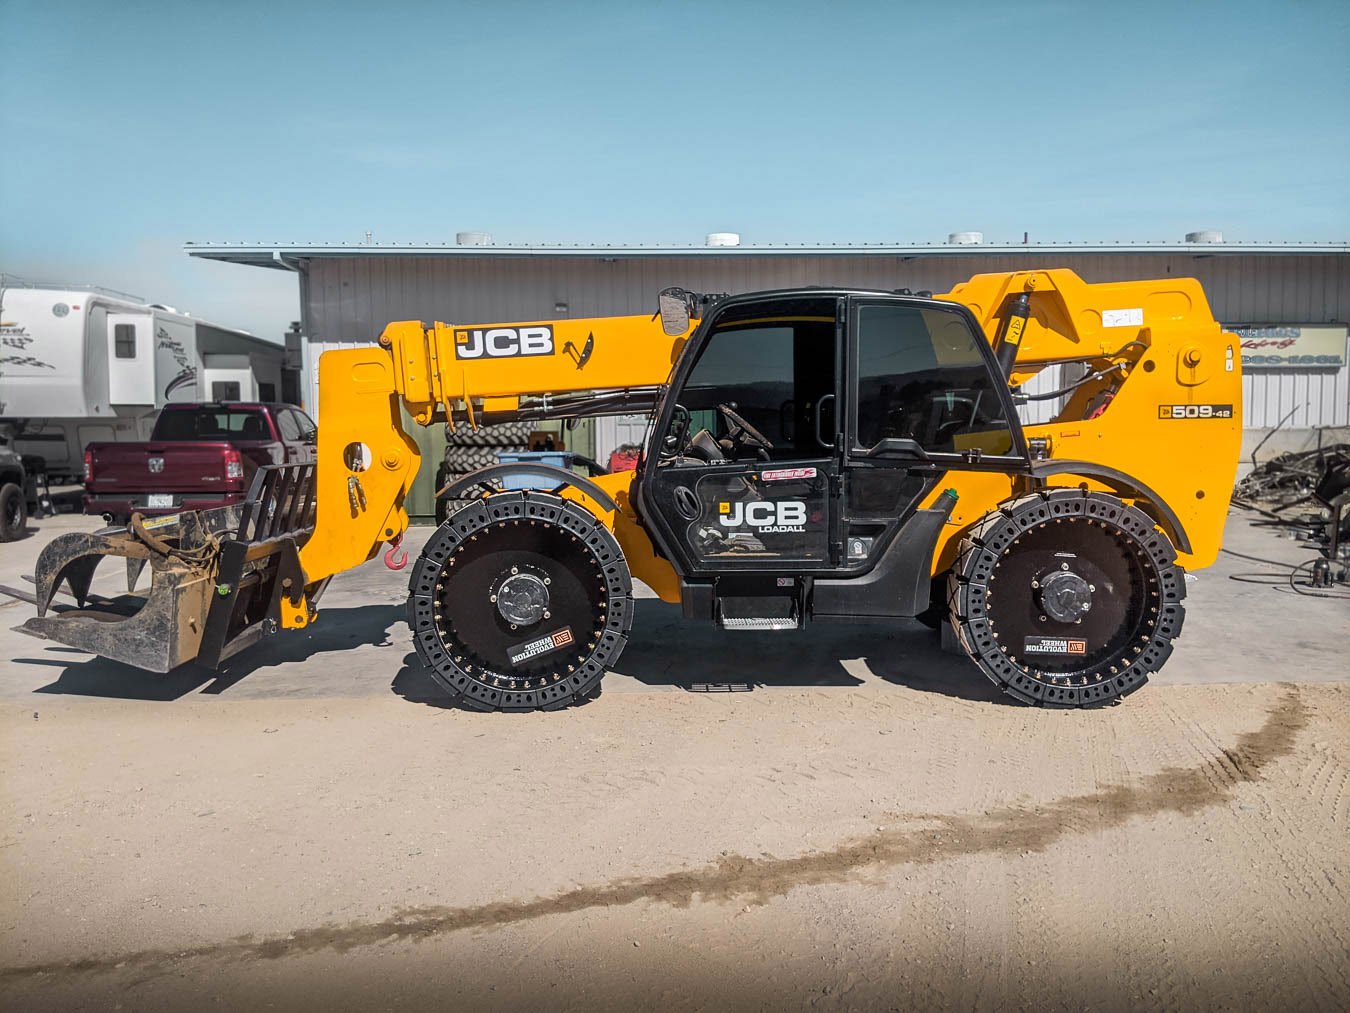 This picture shows our Xtreme telehandler tires on a black and yellow JCB telehandler